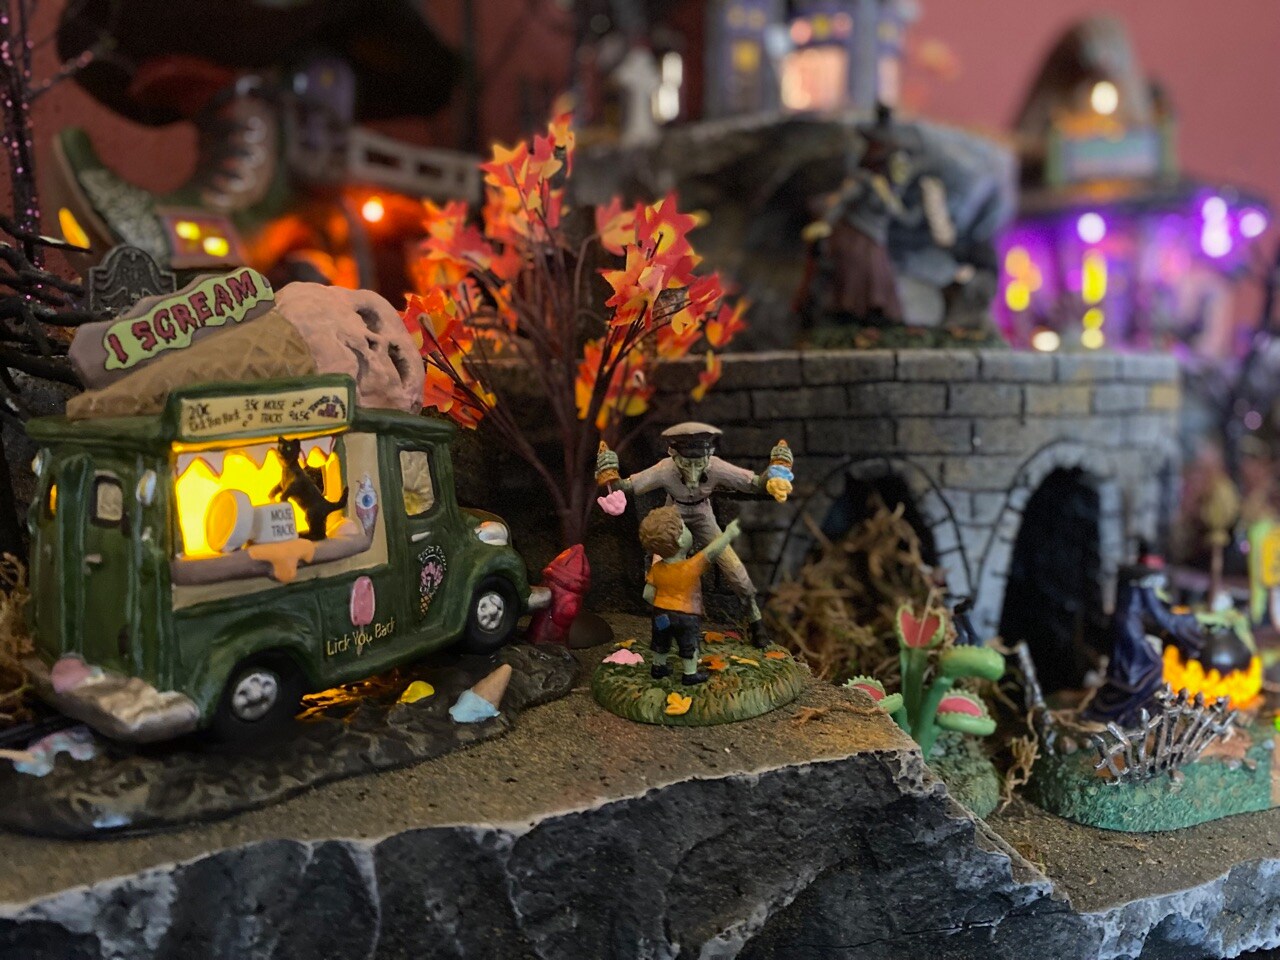 Handmade Spooky Hollow Display Platform for Lemax or Dept 56 Halloween  Village (Not Included) - Free Shipping